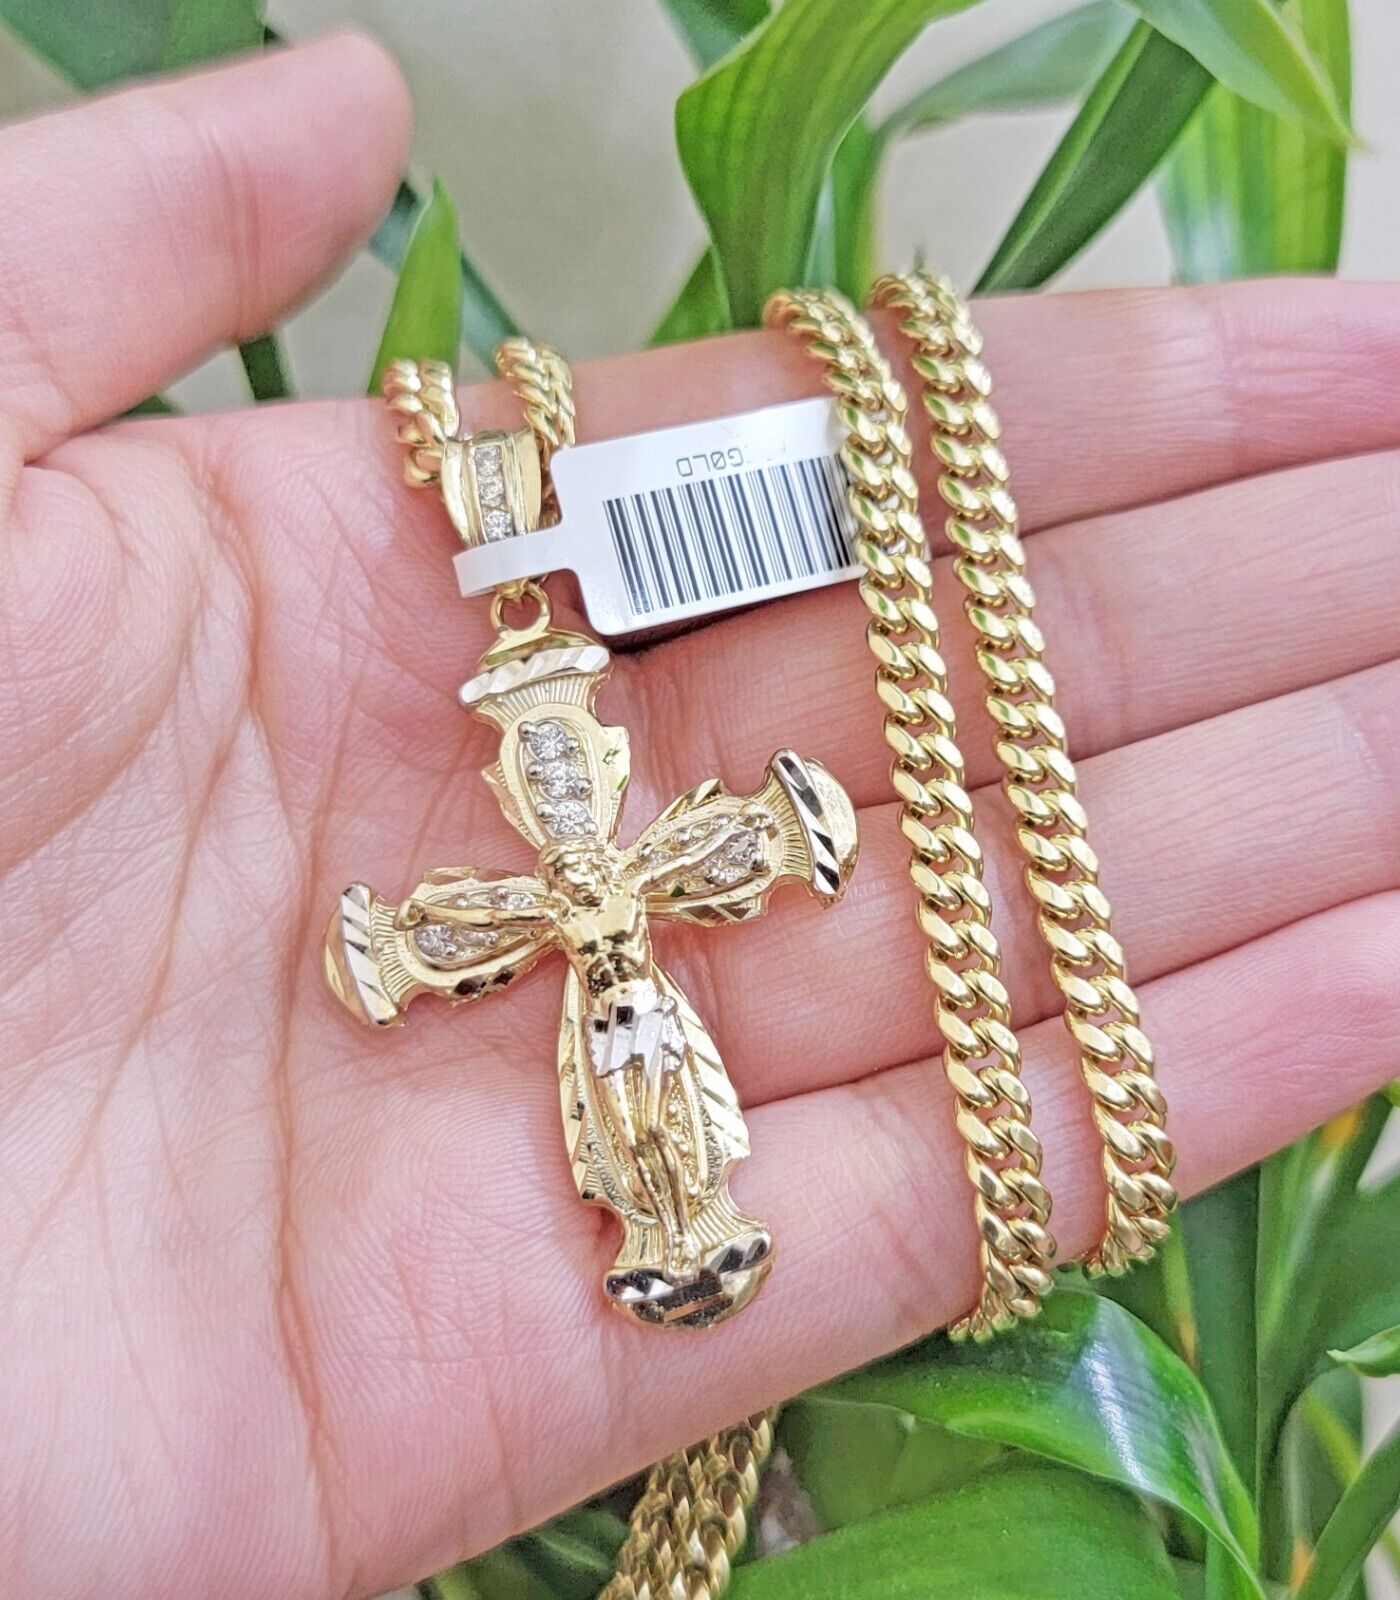 Real 10k Gold Chain & cross charm pendant SET Miami Cuban link necklace 5 mm 20"